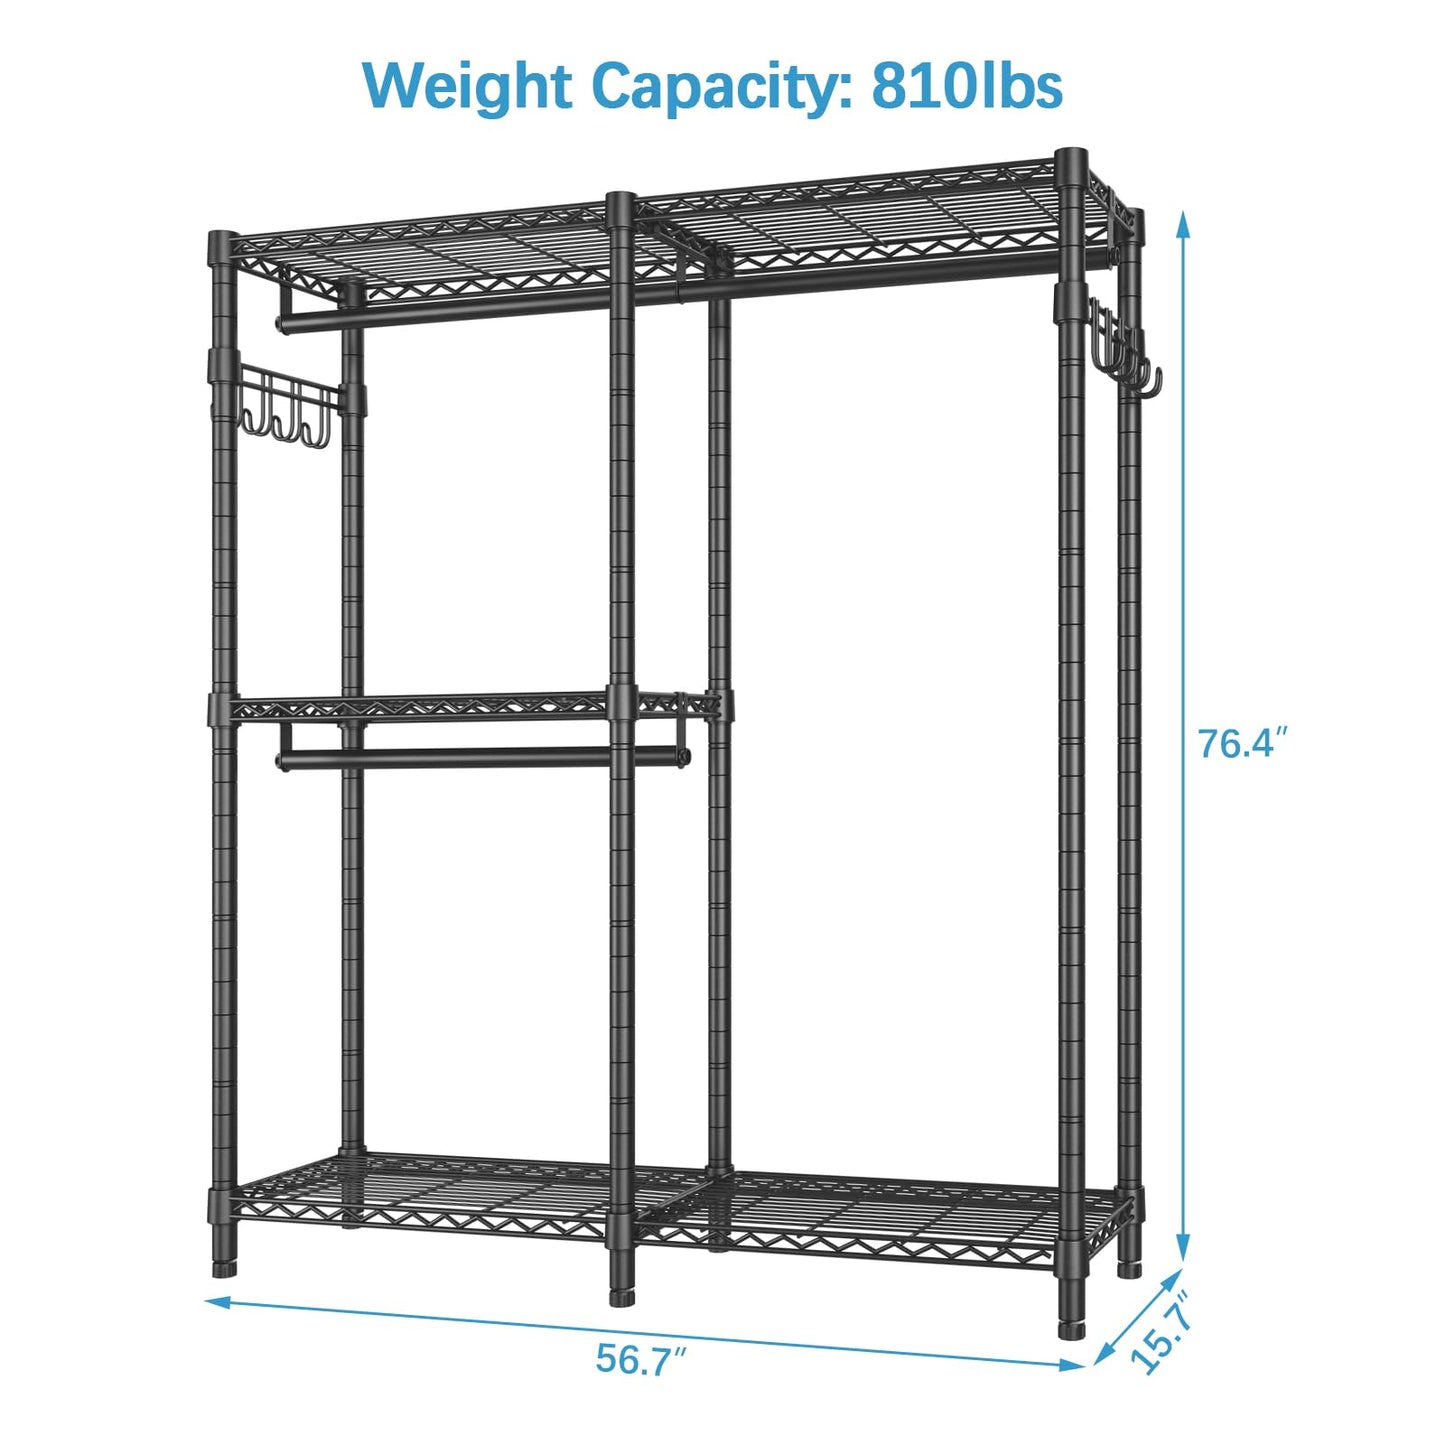 V4 Garment Rack for Hanging Clothes, Portable Closet Storage System with Adjustable Shelves Heavy Duty Clothes Rack Metal Wardrobe Double Clothing Rack with 2 Side Hooks, Max Load 810lbs, Black